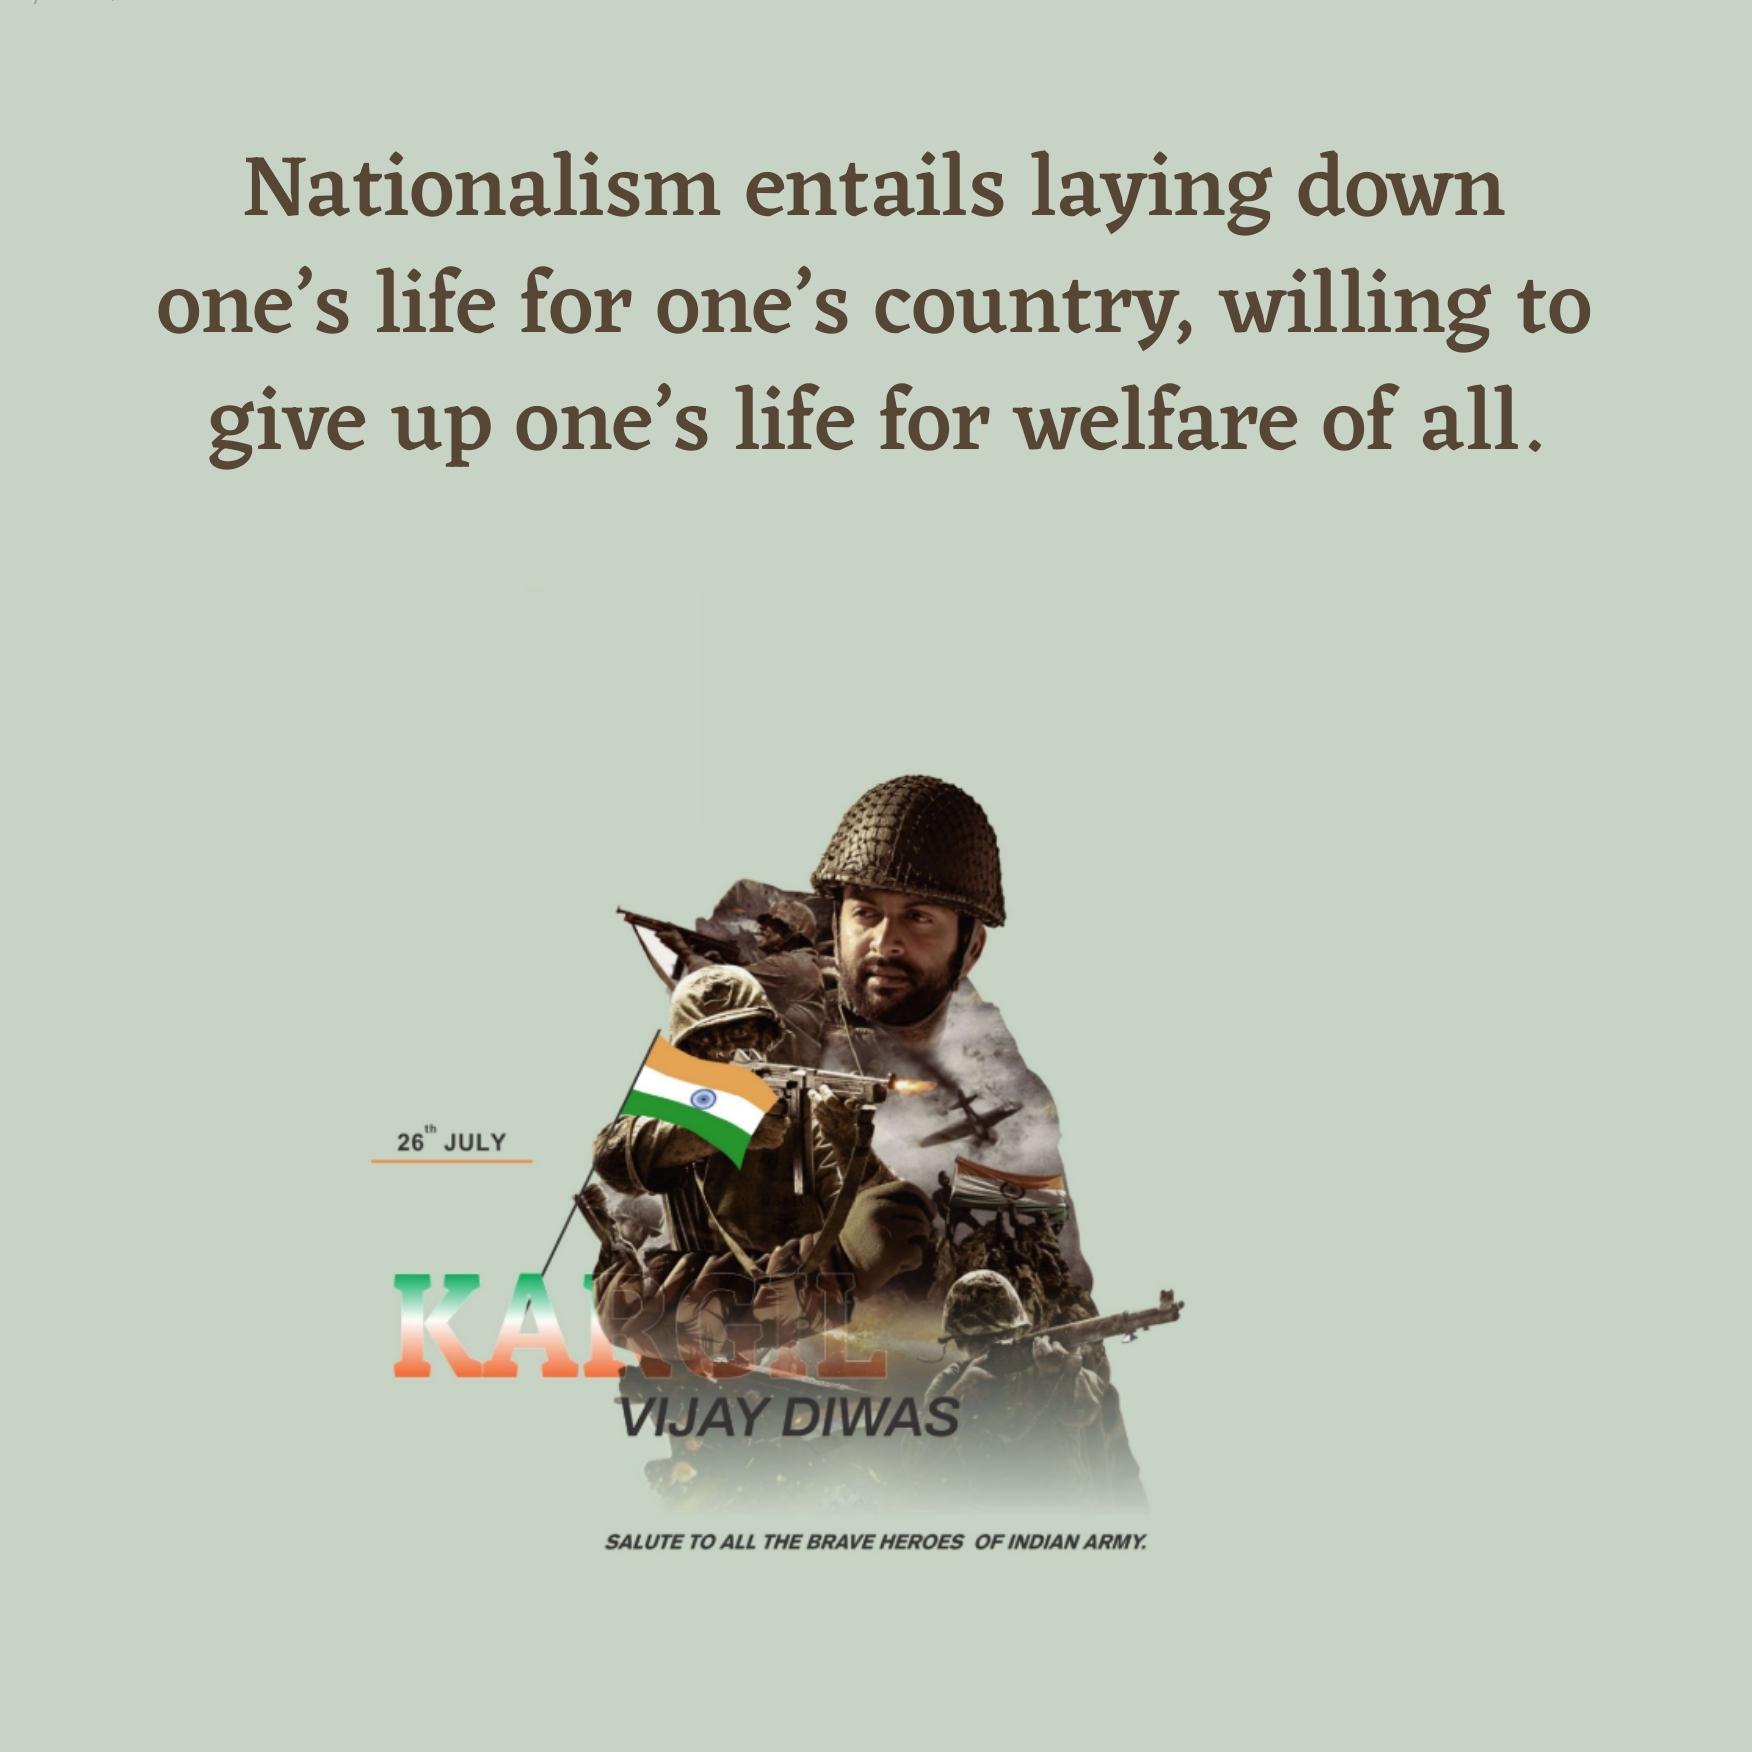 Nationalism entails laying down ones life for ones country